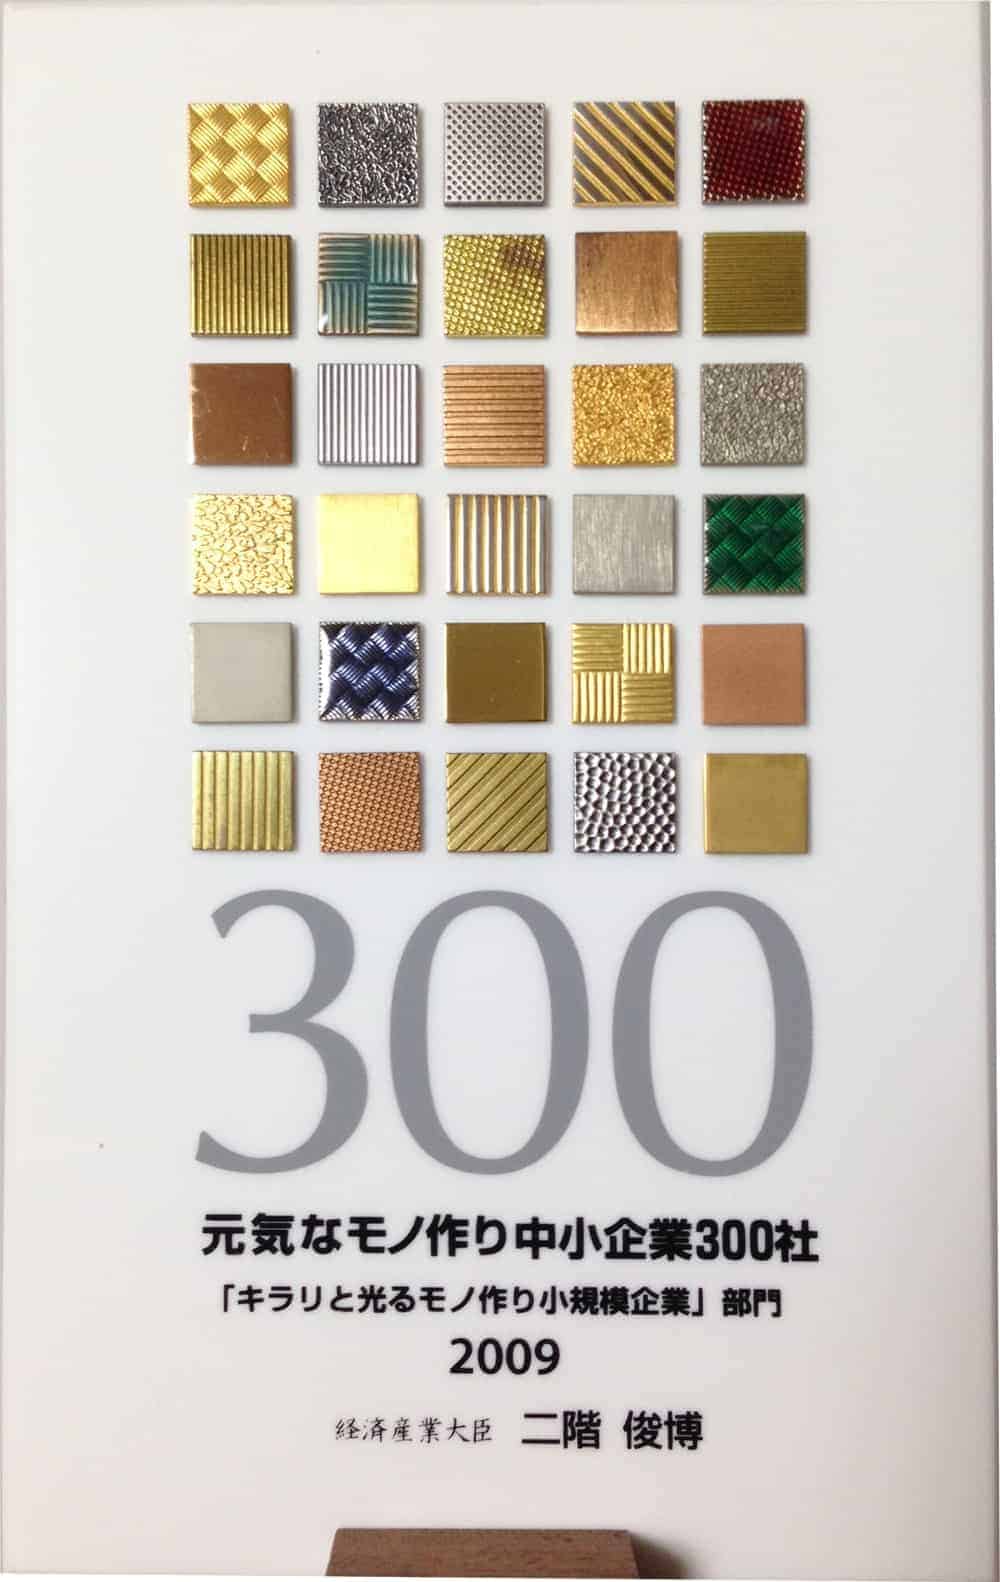 300 small and medium enterprises certified by the Japanese government